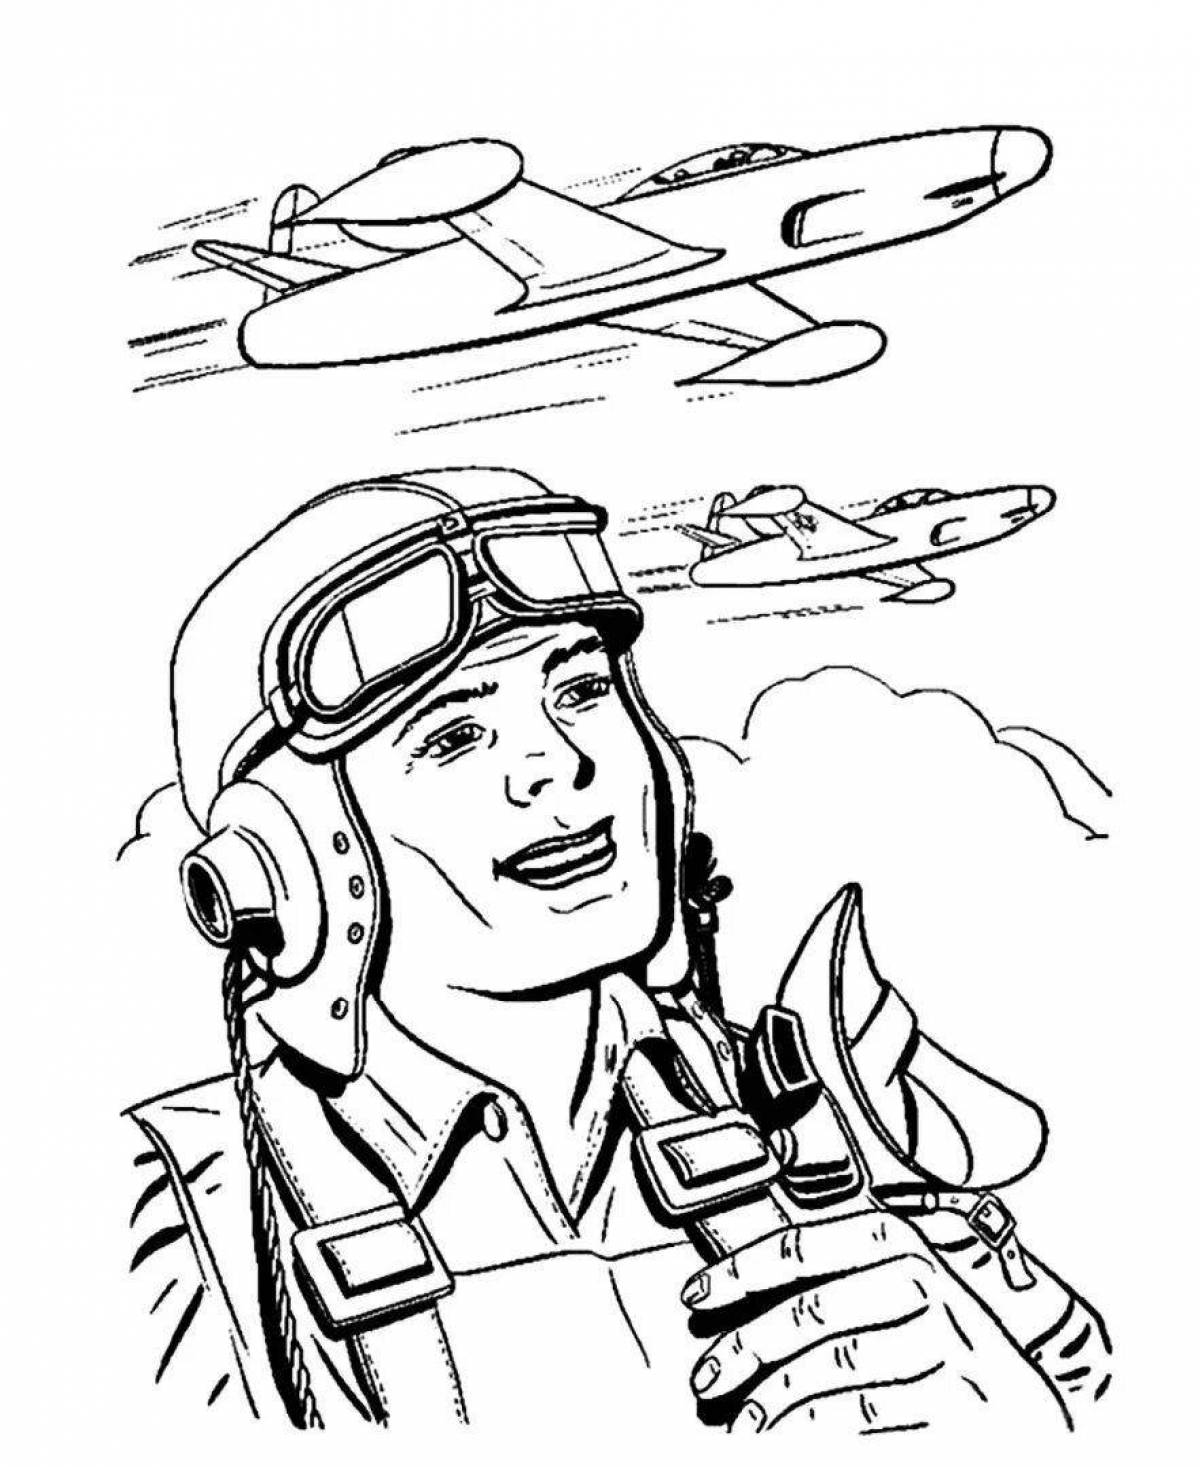 Fabulous military pilots coloring pages for kids